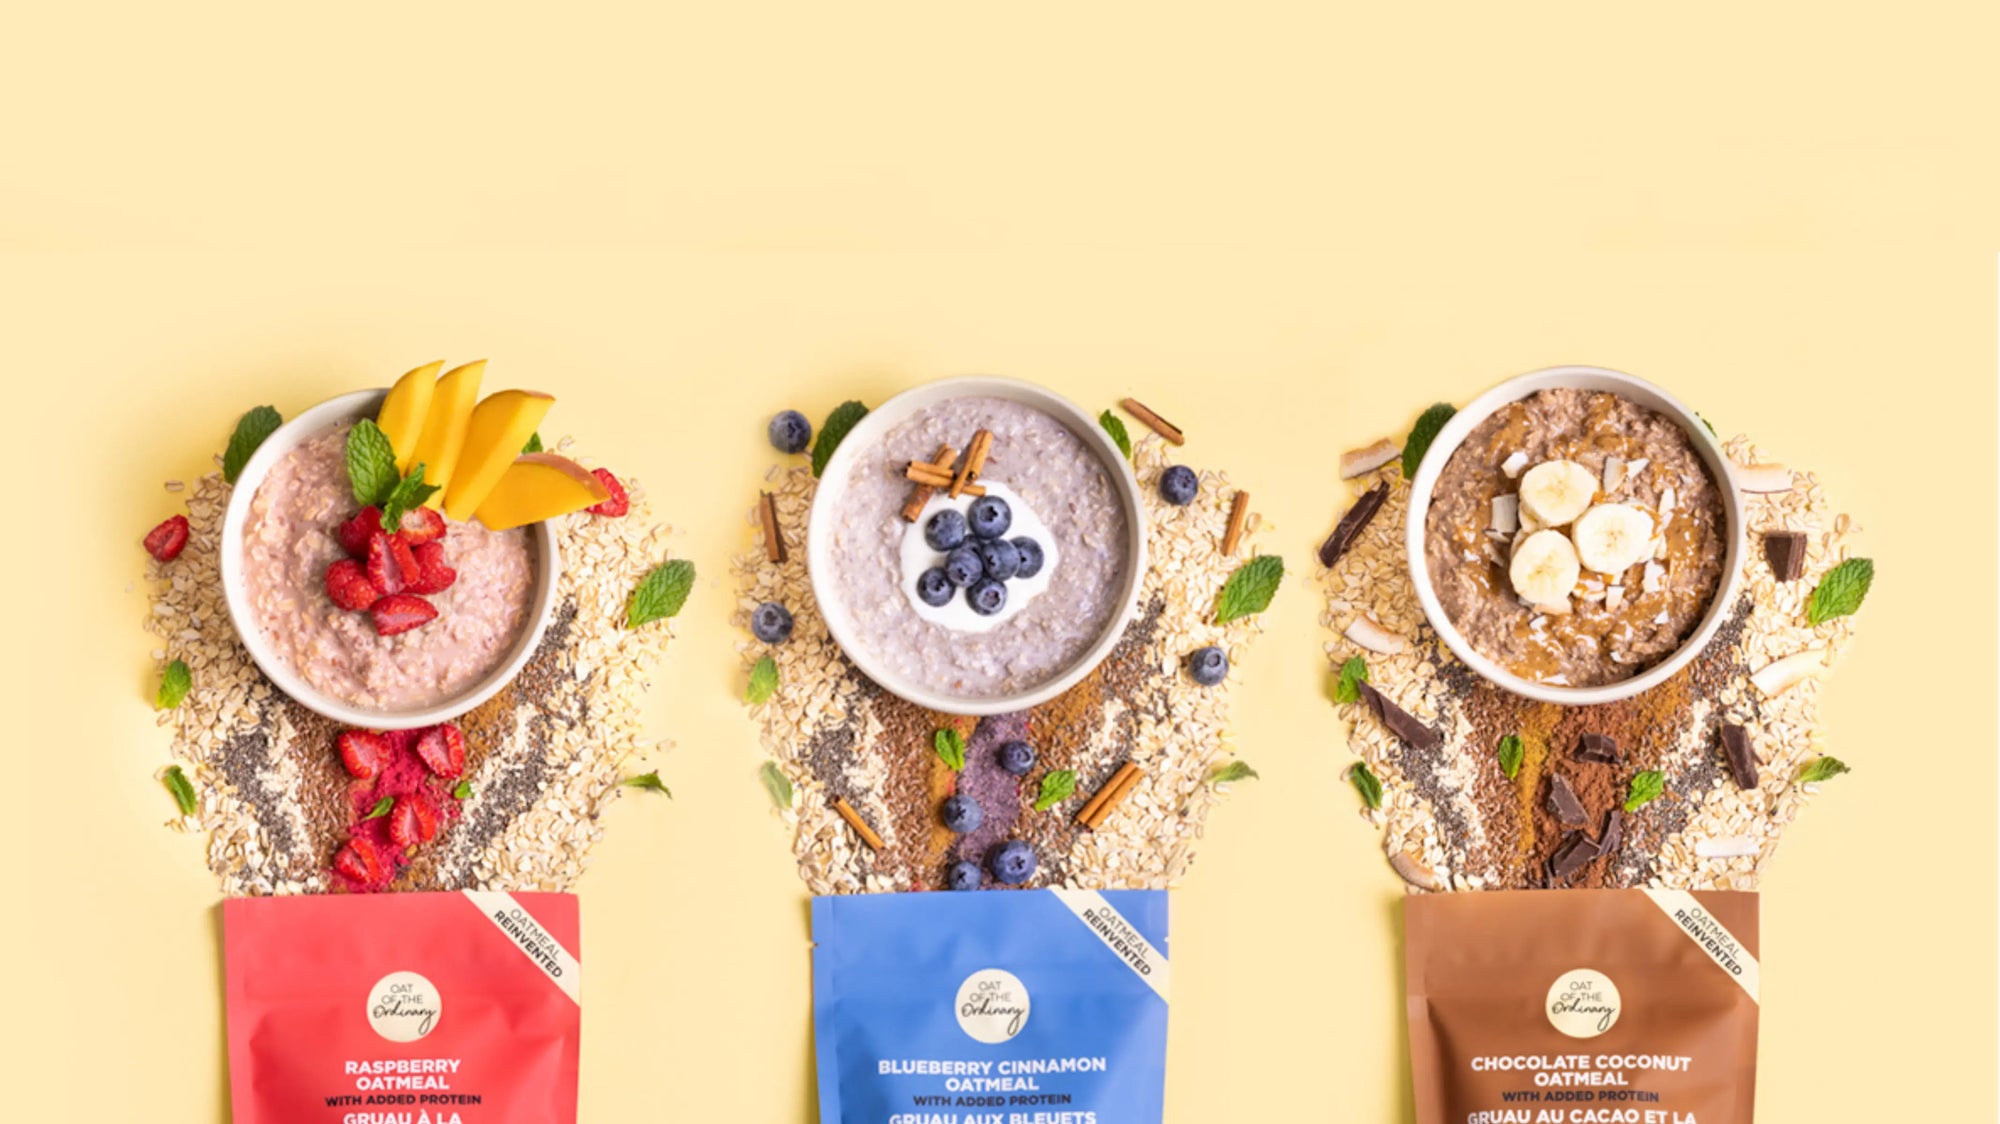 protein oatmeal bowls with ingredients spilling out from the multi-serve pouches.